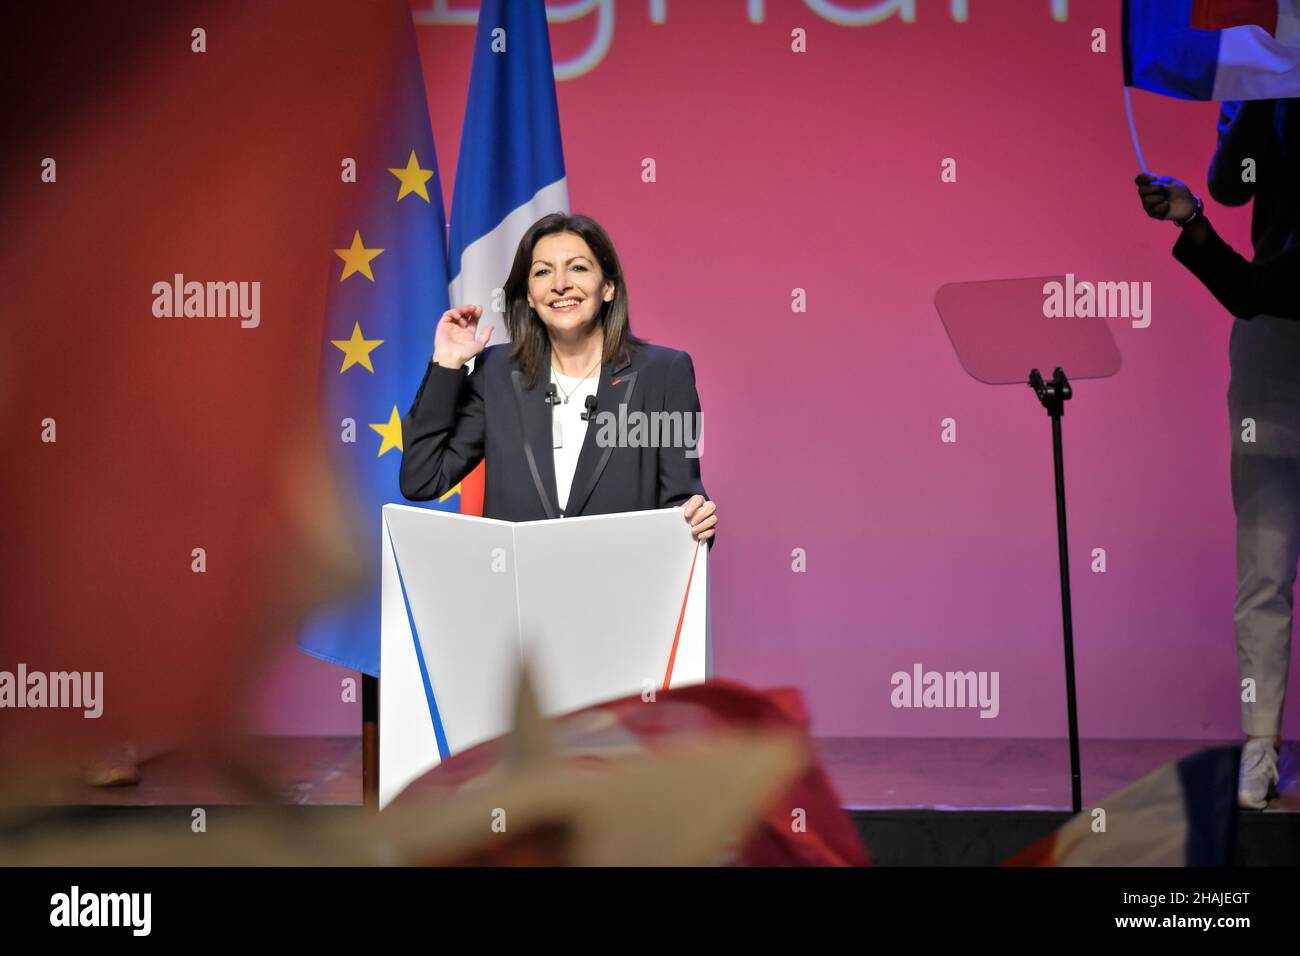 Ana María 'Anne' Hidalgo Aleu delivers a speech on stage during a meeting in Perpignan.Anne Hidalgo, the French Socialist presidential candidate, has repeated her plea for her leftwing rivals to unite, saying the left risked collapsing amid the alarming rise of the far-right. Taking the stage, she appealed to other candidates on the left not to split the vote: “Wake up, see the danger that is facing us.” French voters felt “despairing and anguished” that the left was being drowned out of the political debate, she said. Stock Photo